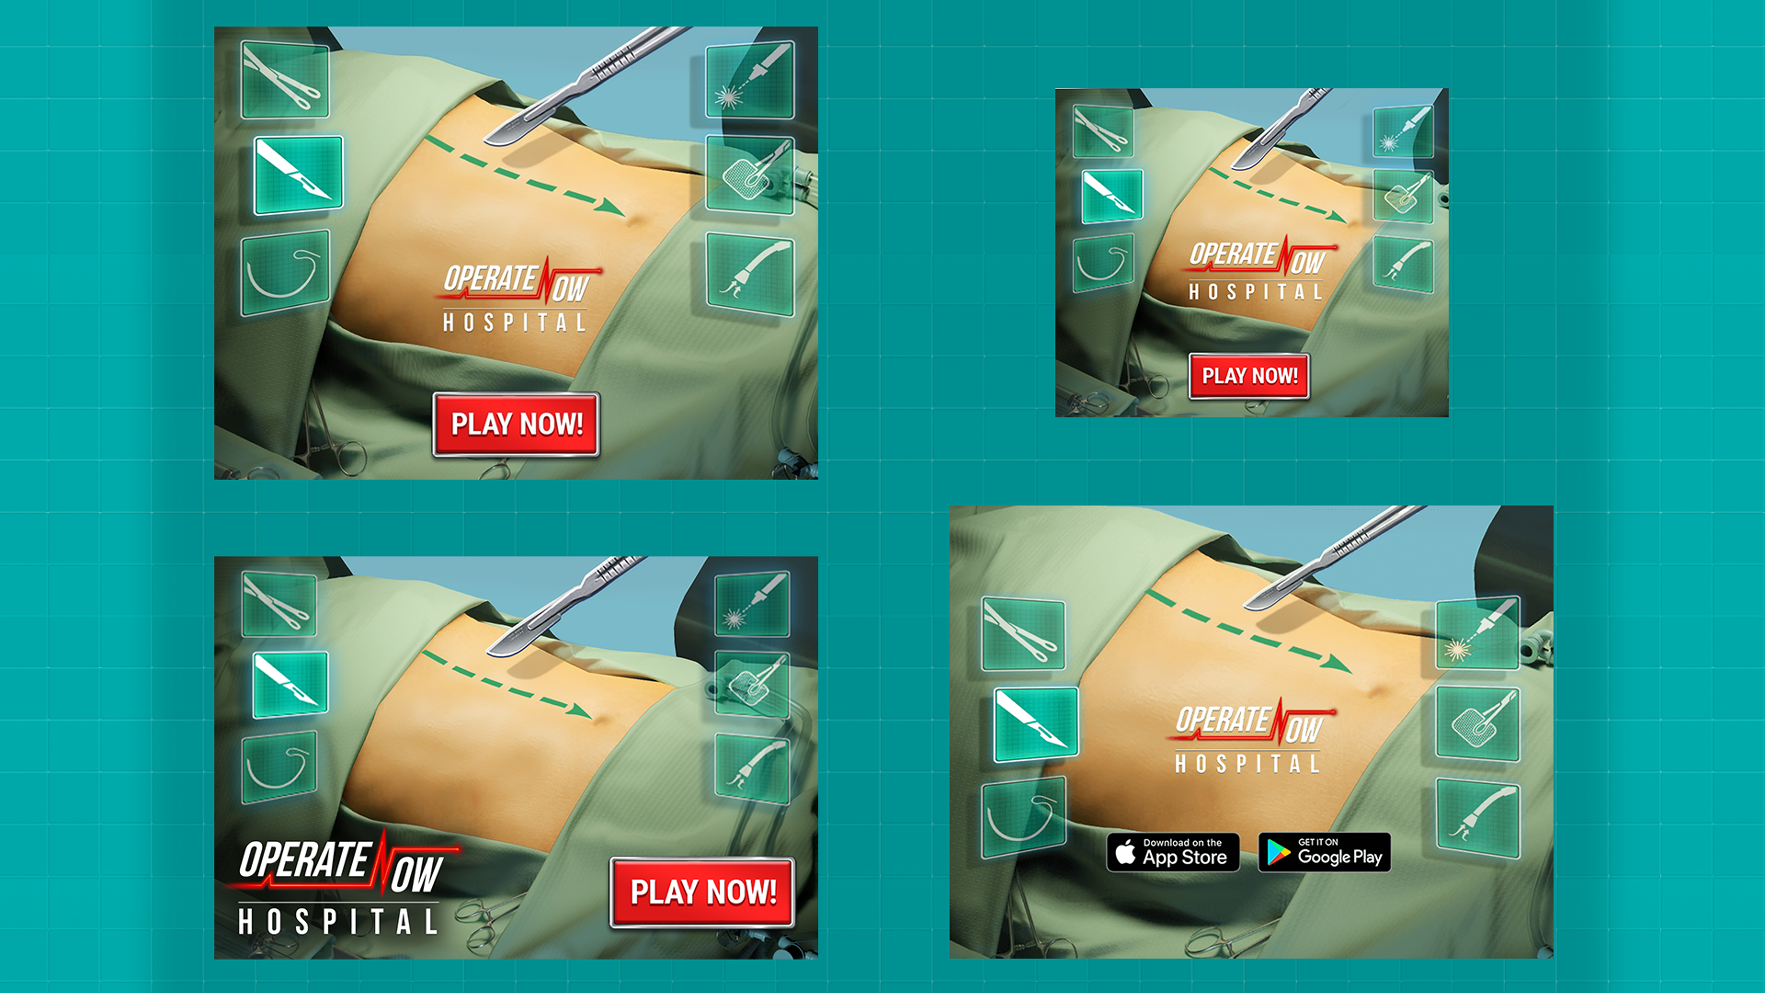 Operate Now Hospital - Surgery - Apps on Google Play